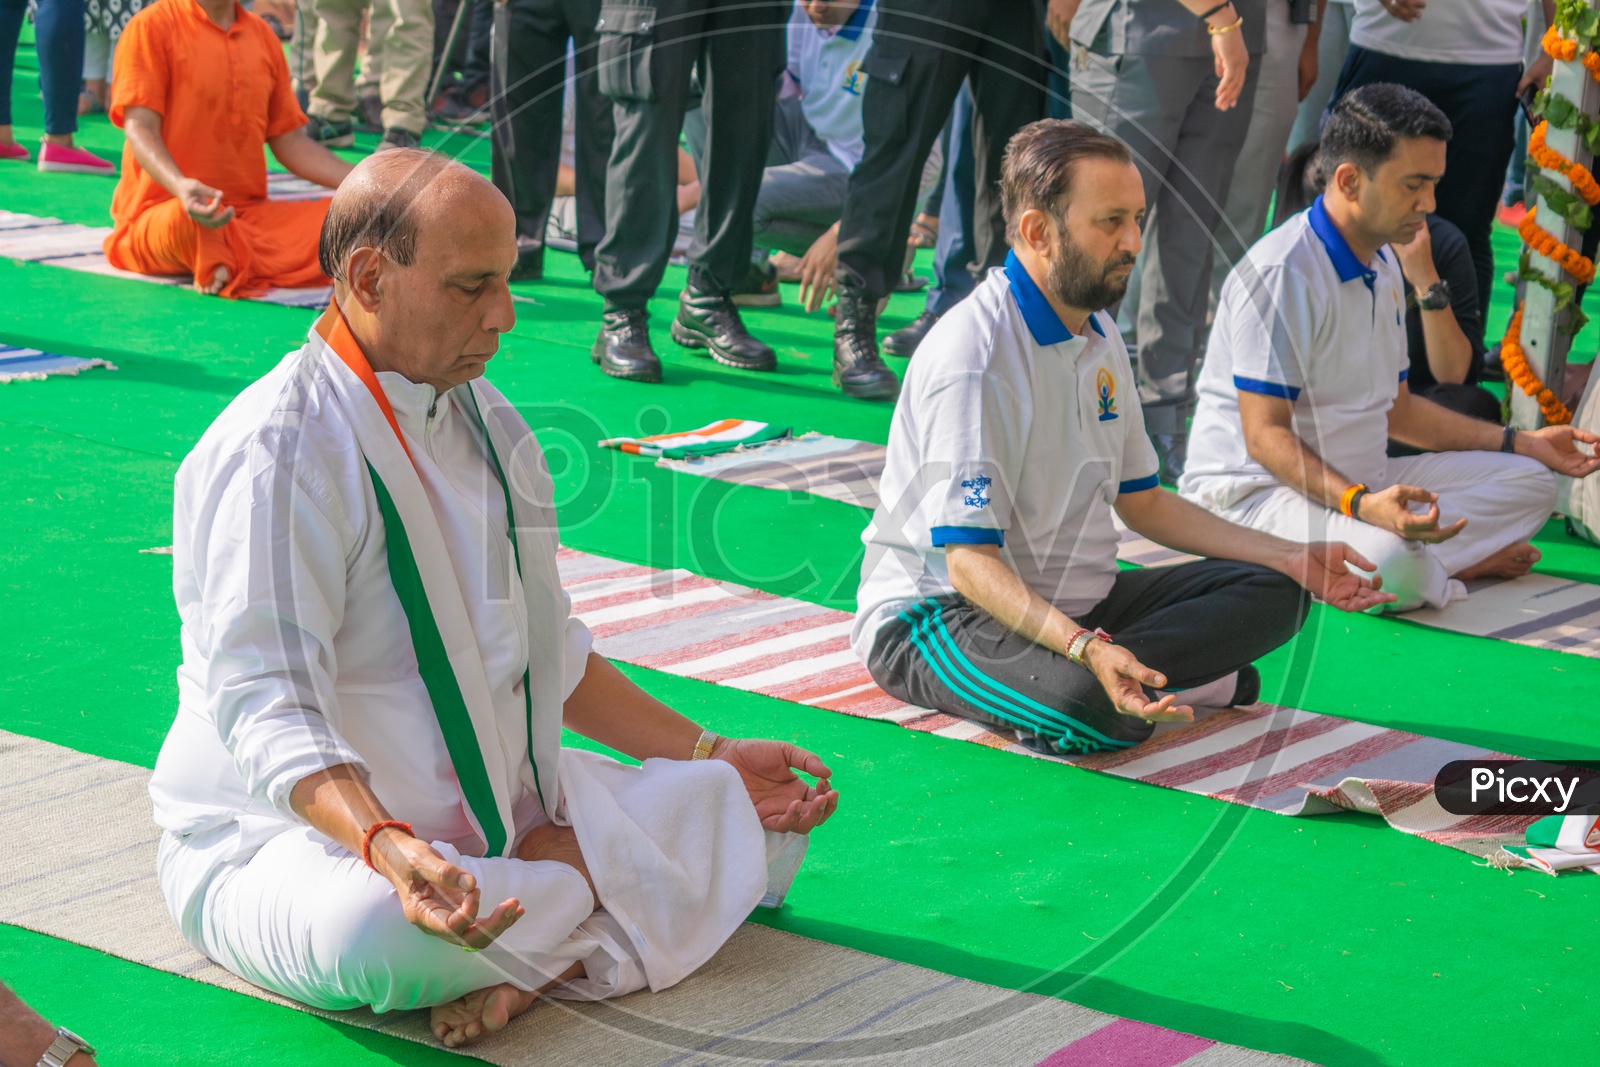 Rajnath Singh ( Defence Minister of India) and Prakash Keshav Javadekar (Minister of Environment, Forest and Climate Change and Minister of Information and Broadcasting) in Yoga Mudra